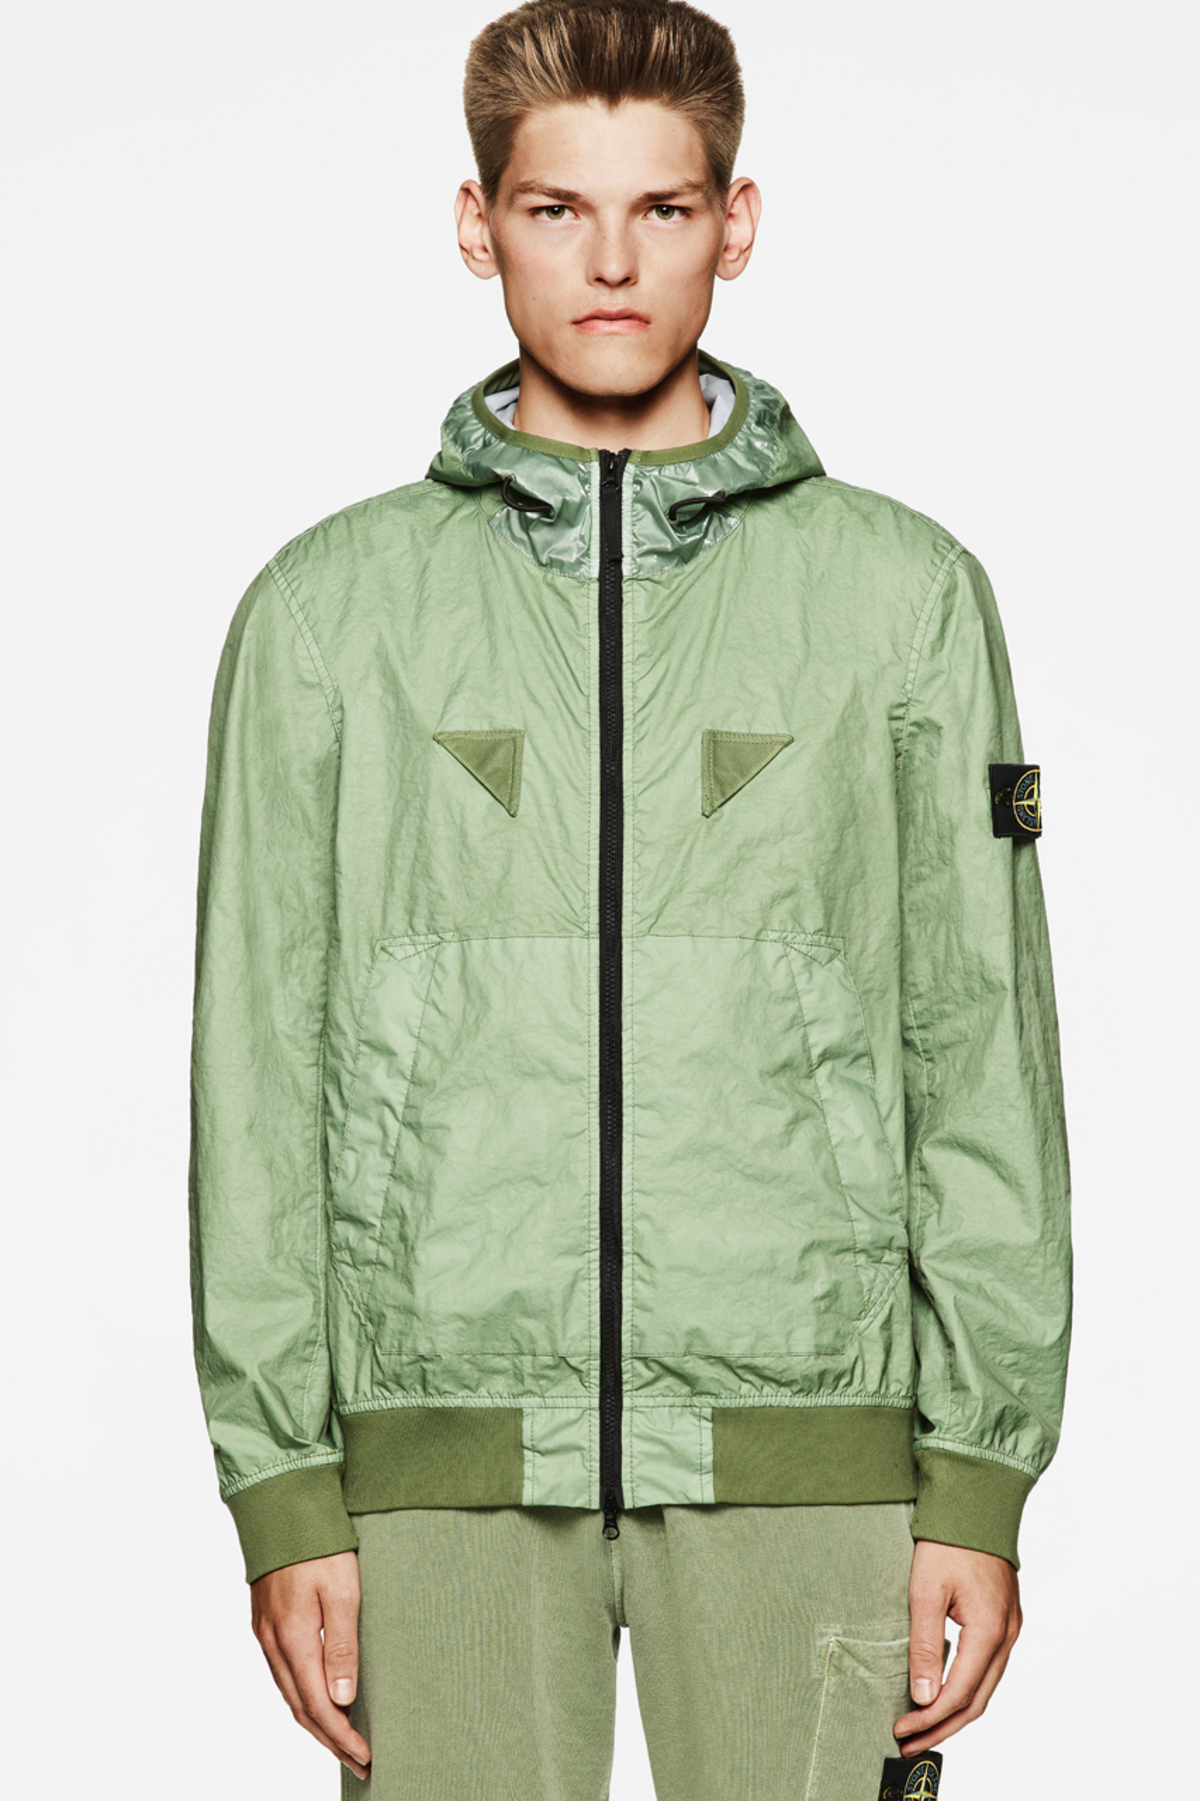 Available Now from Stone Island – Feature